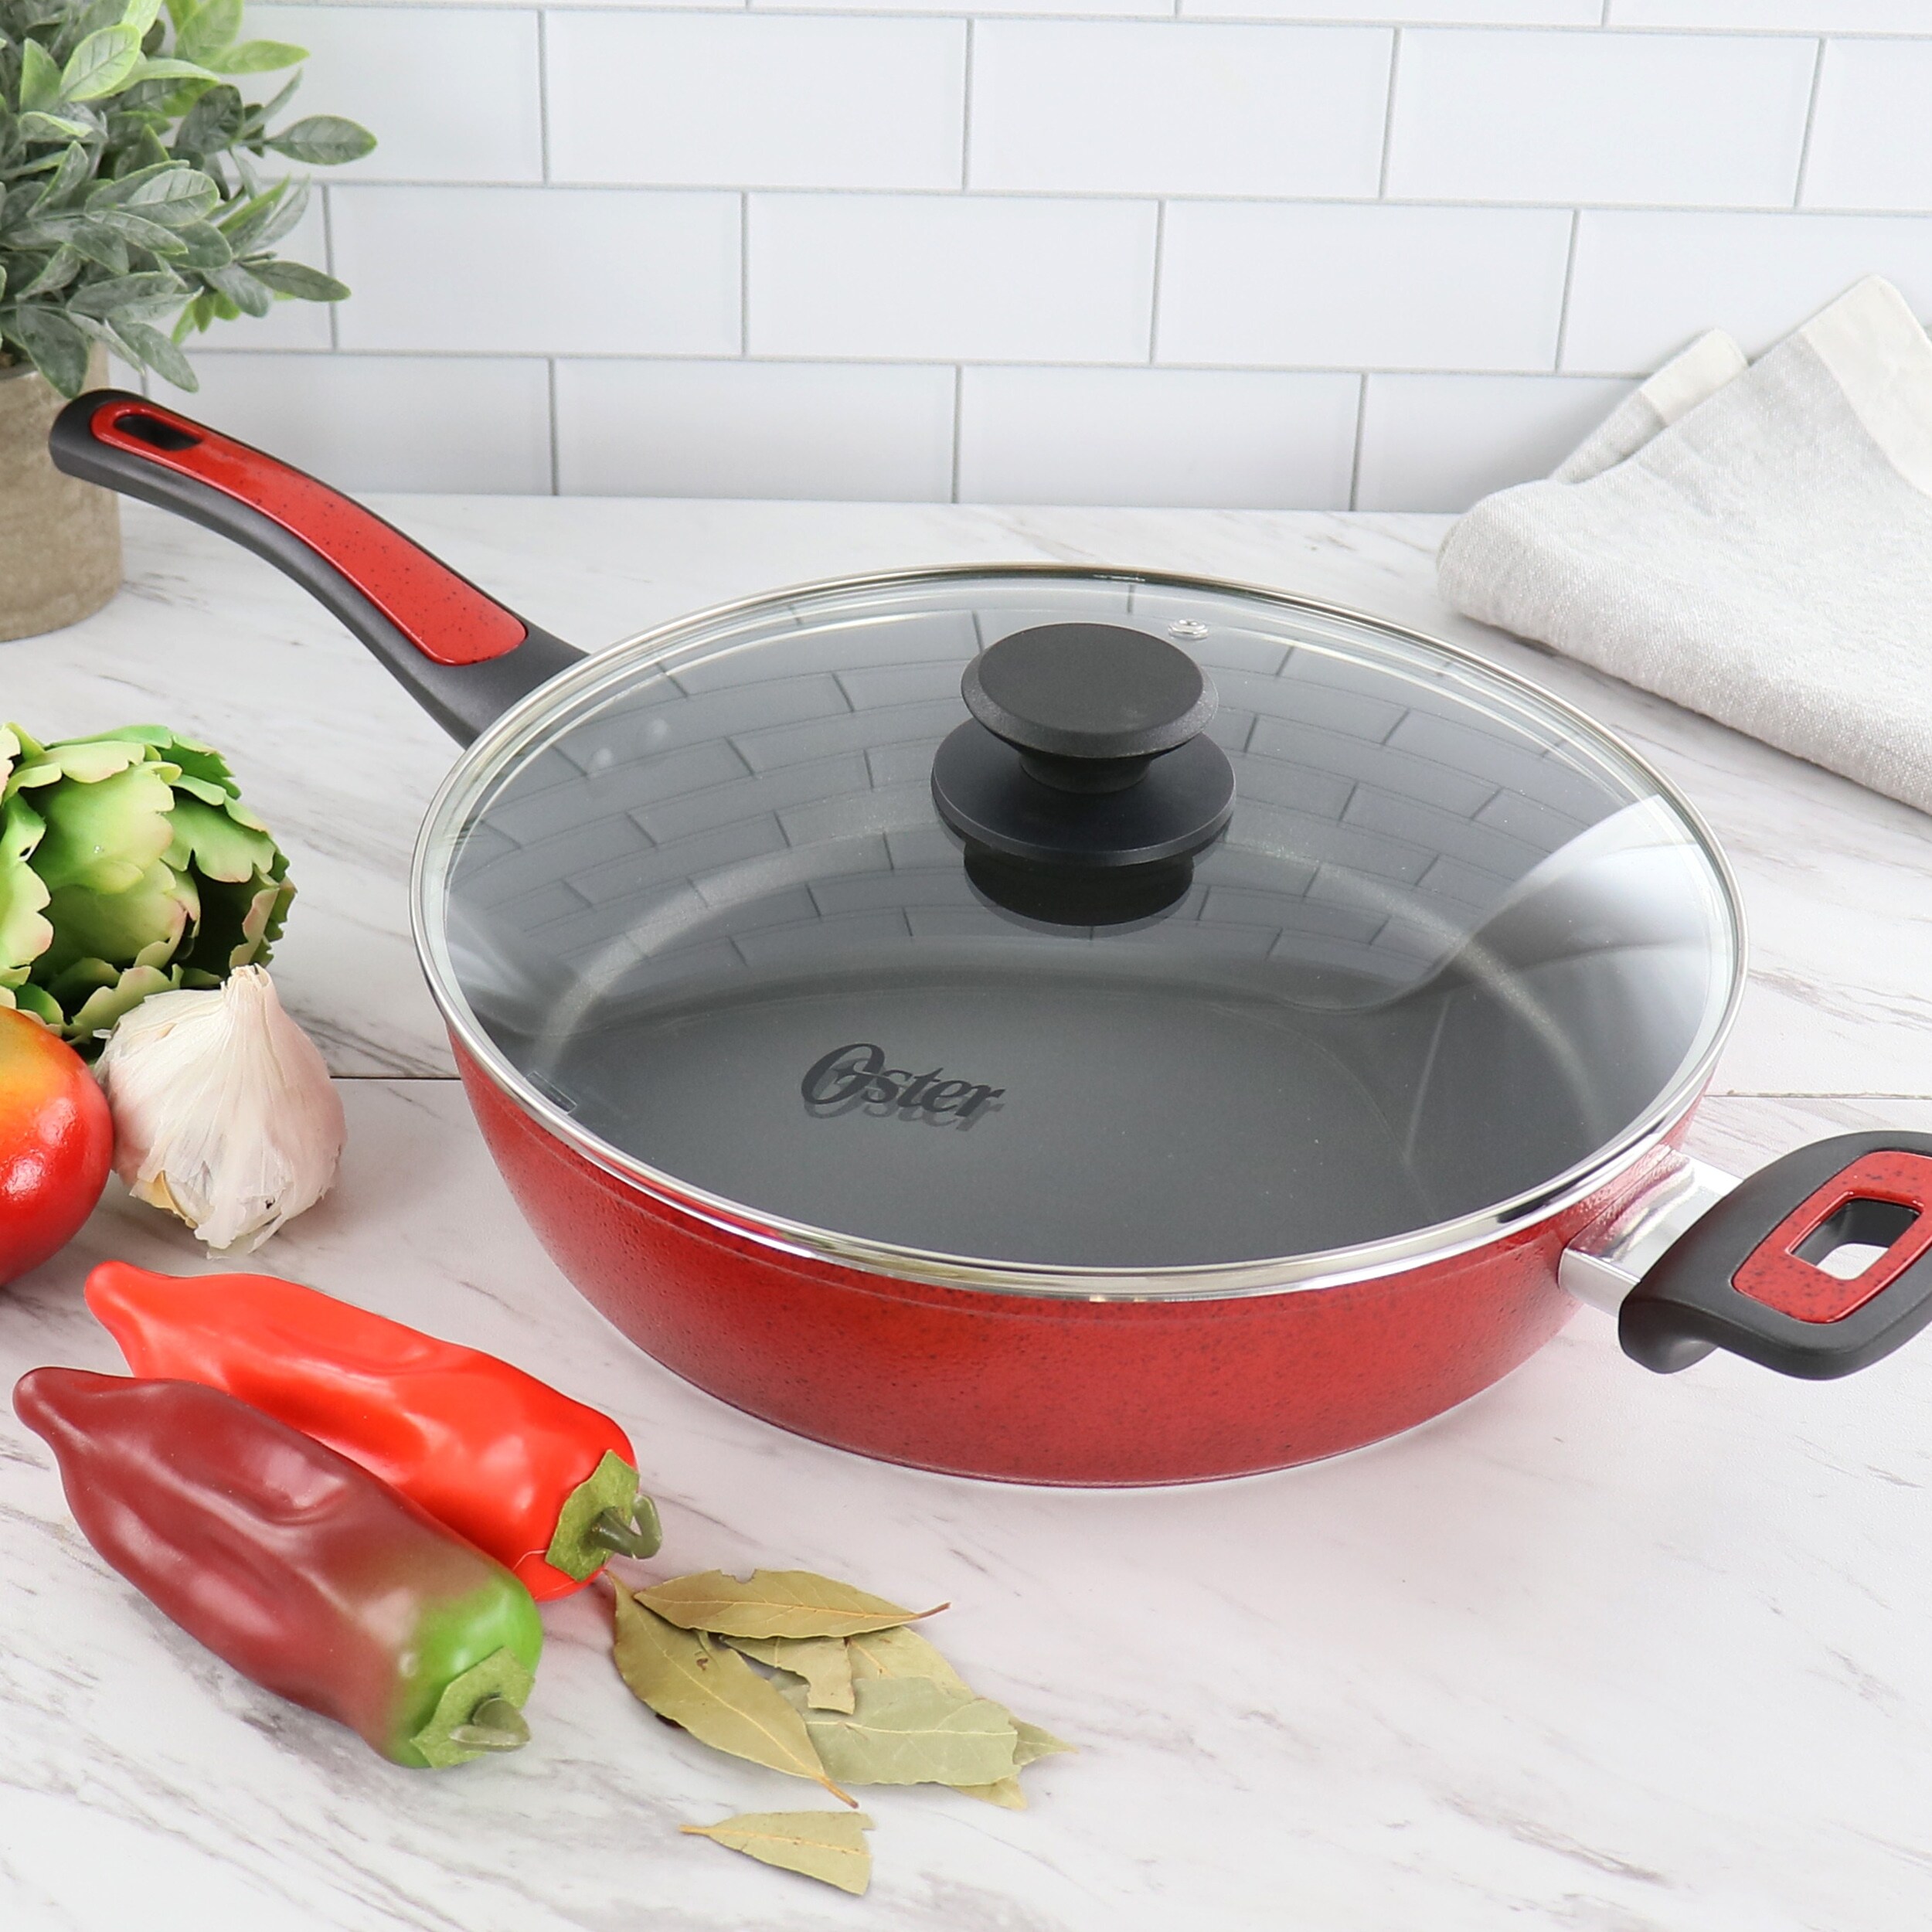 https://ak1.ostkcdn.com/images/products/is/images/direct/11a80ff6233339321f5988a75db7523046b24d42/3.8-Quart-Nonstick-Saute-Pan-With-Lid-in-Speckled-Red.jpg